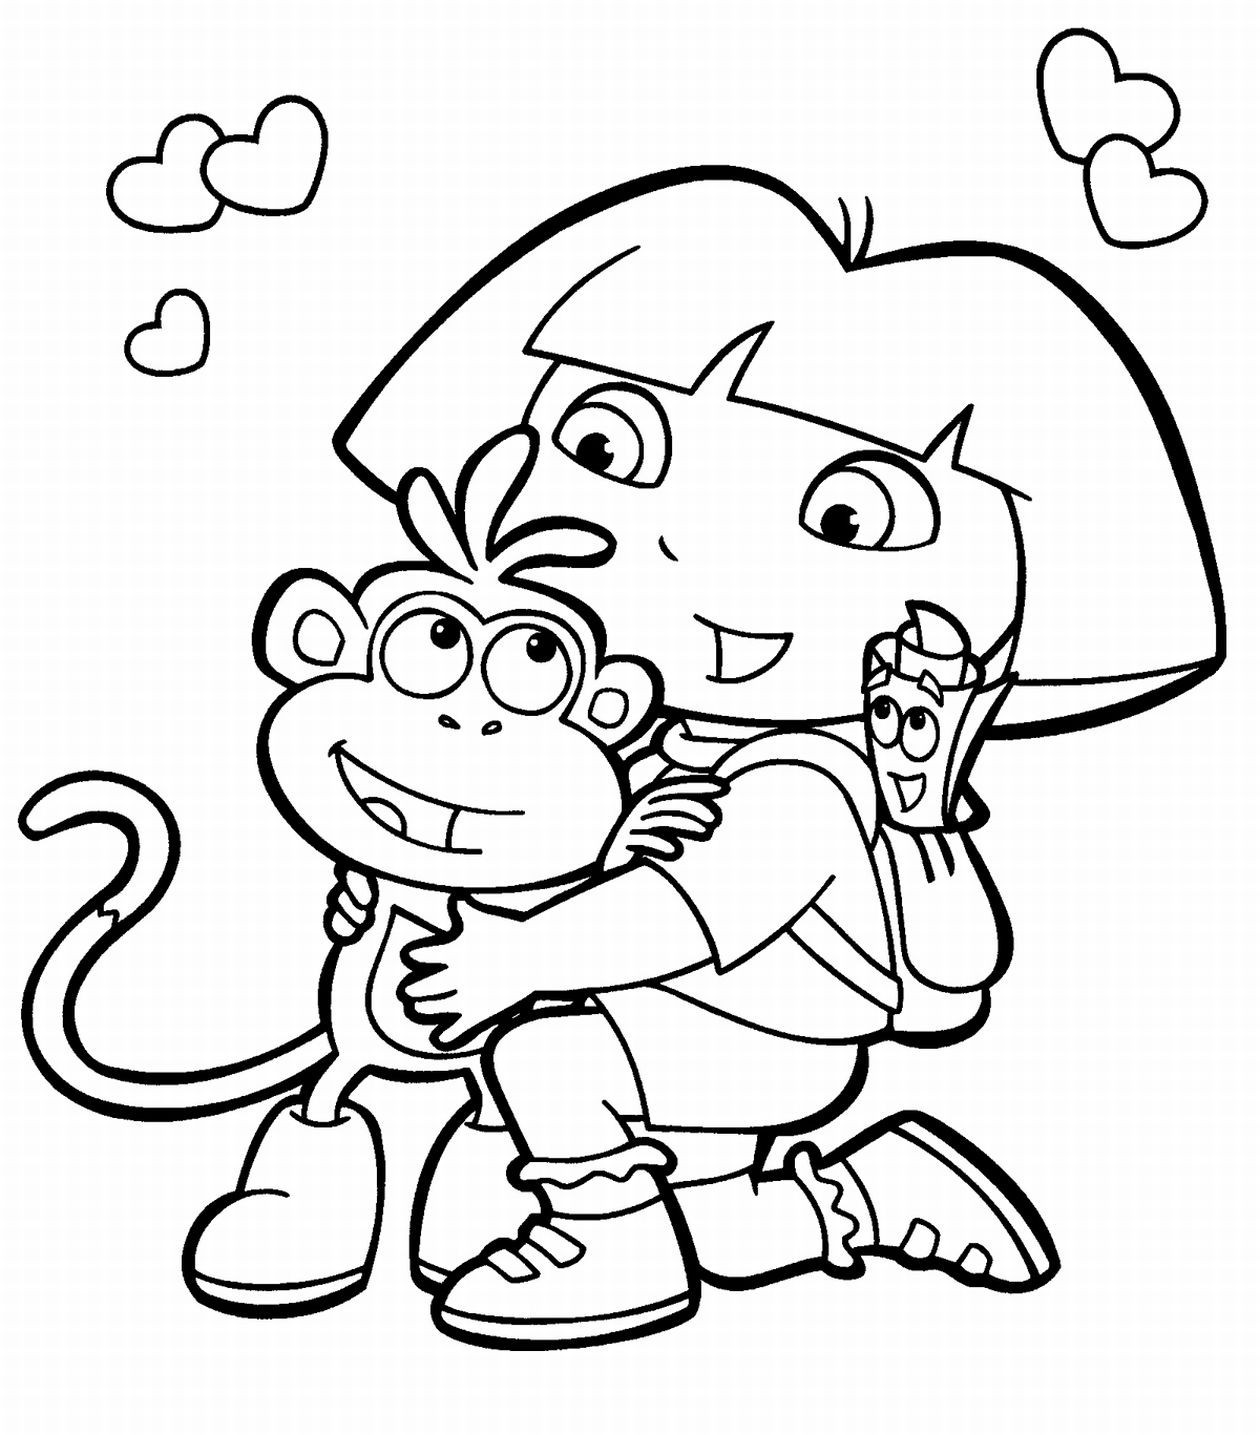 Fun Coloring Pages For Girls
 Best Free Printable Coloring Pages for Kids and Teens